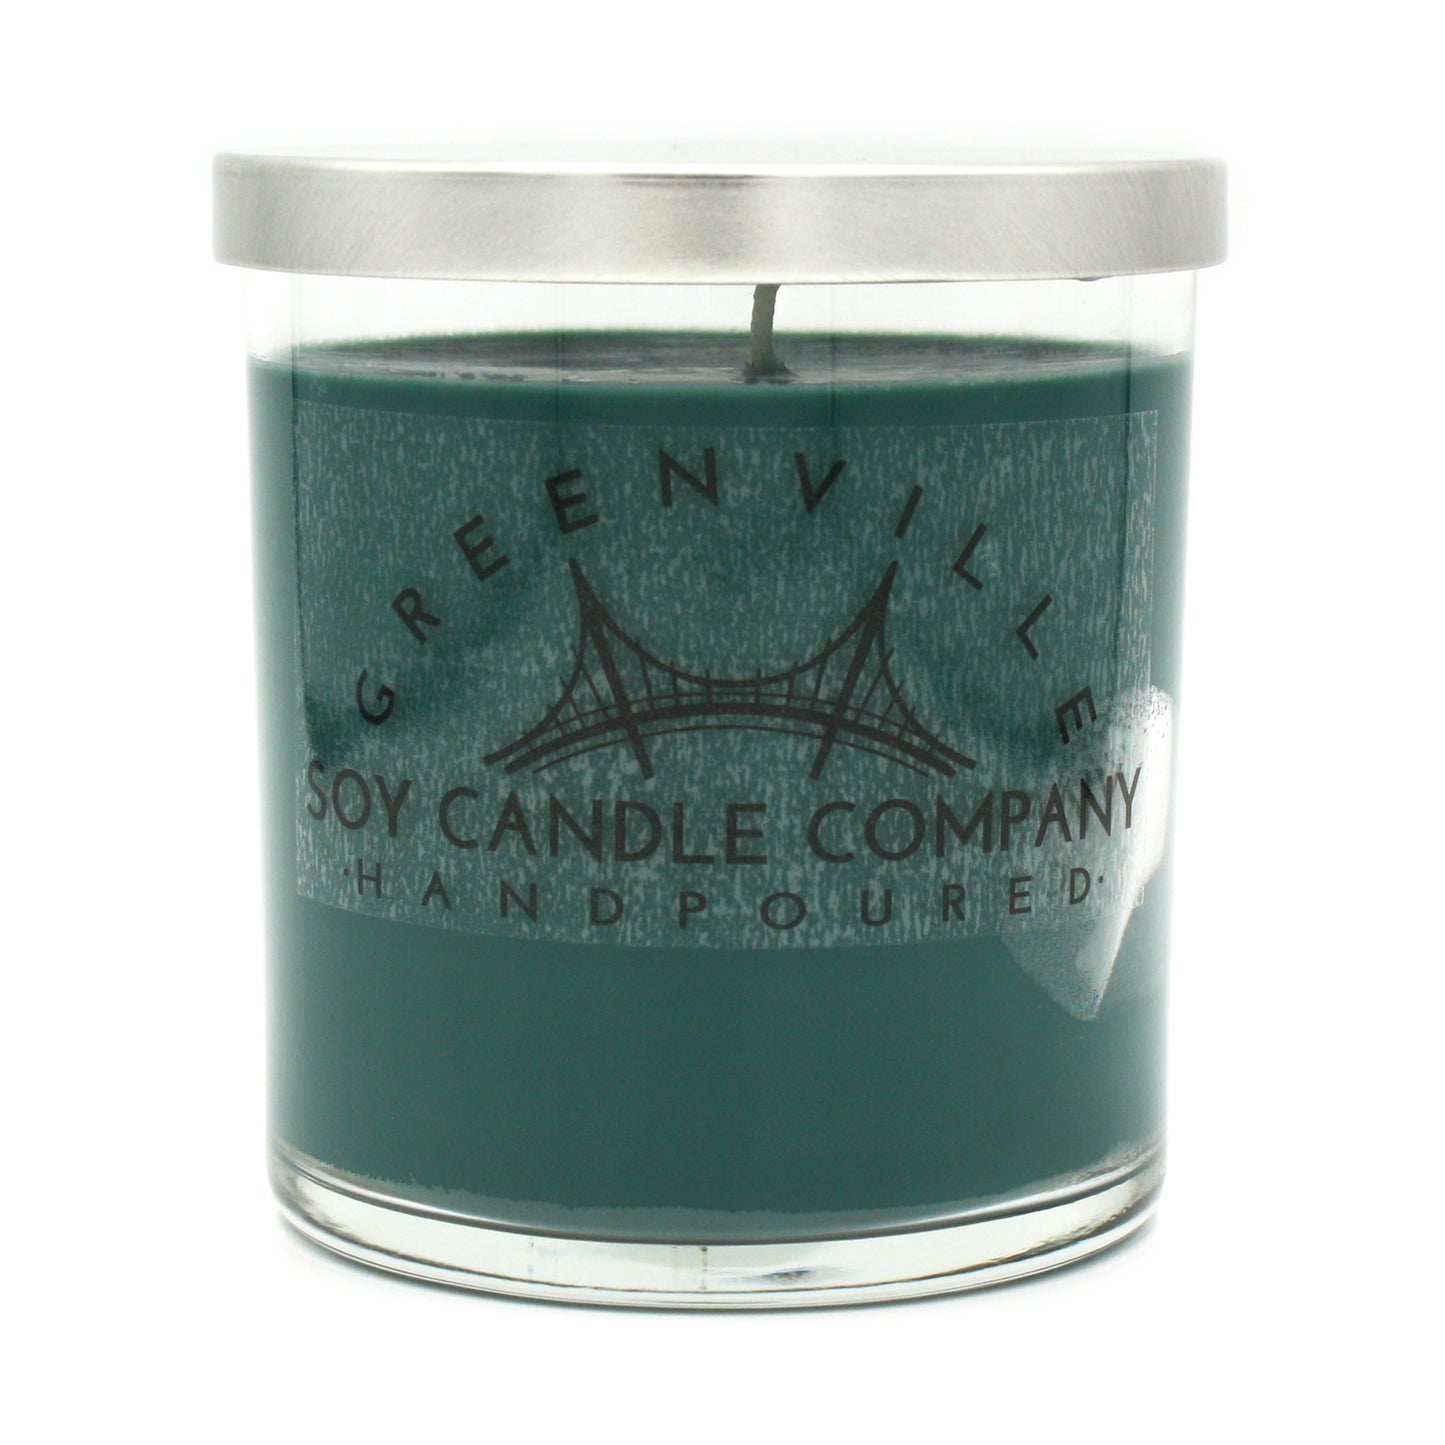 Redwoods, 10oz Soy Candle